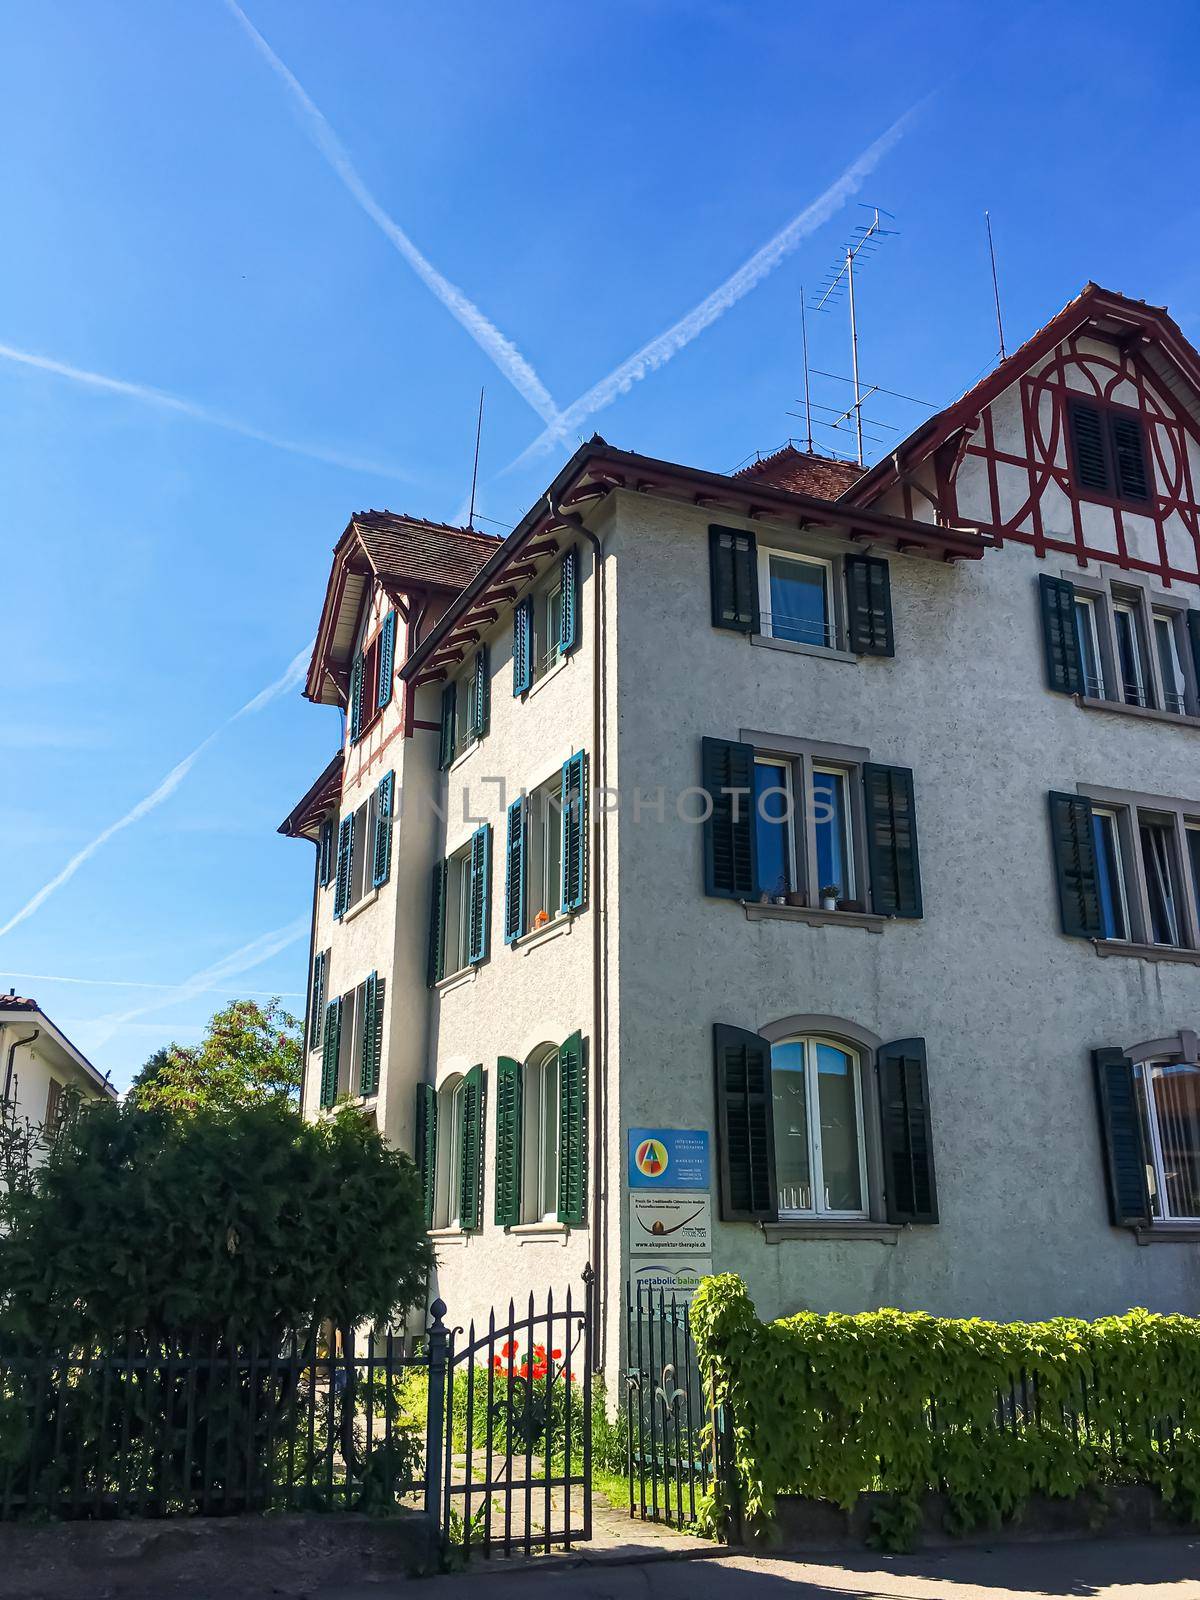 Richterswil, canton of Zurich, Switzerland circa June 2021: Historic building and house on street, Swiss architecture and real estate